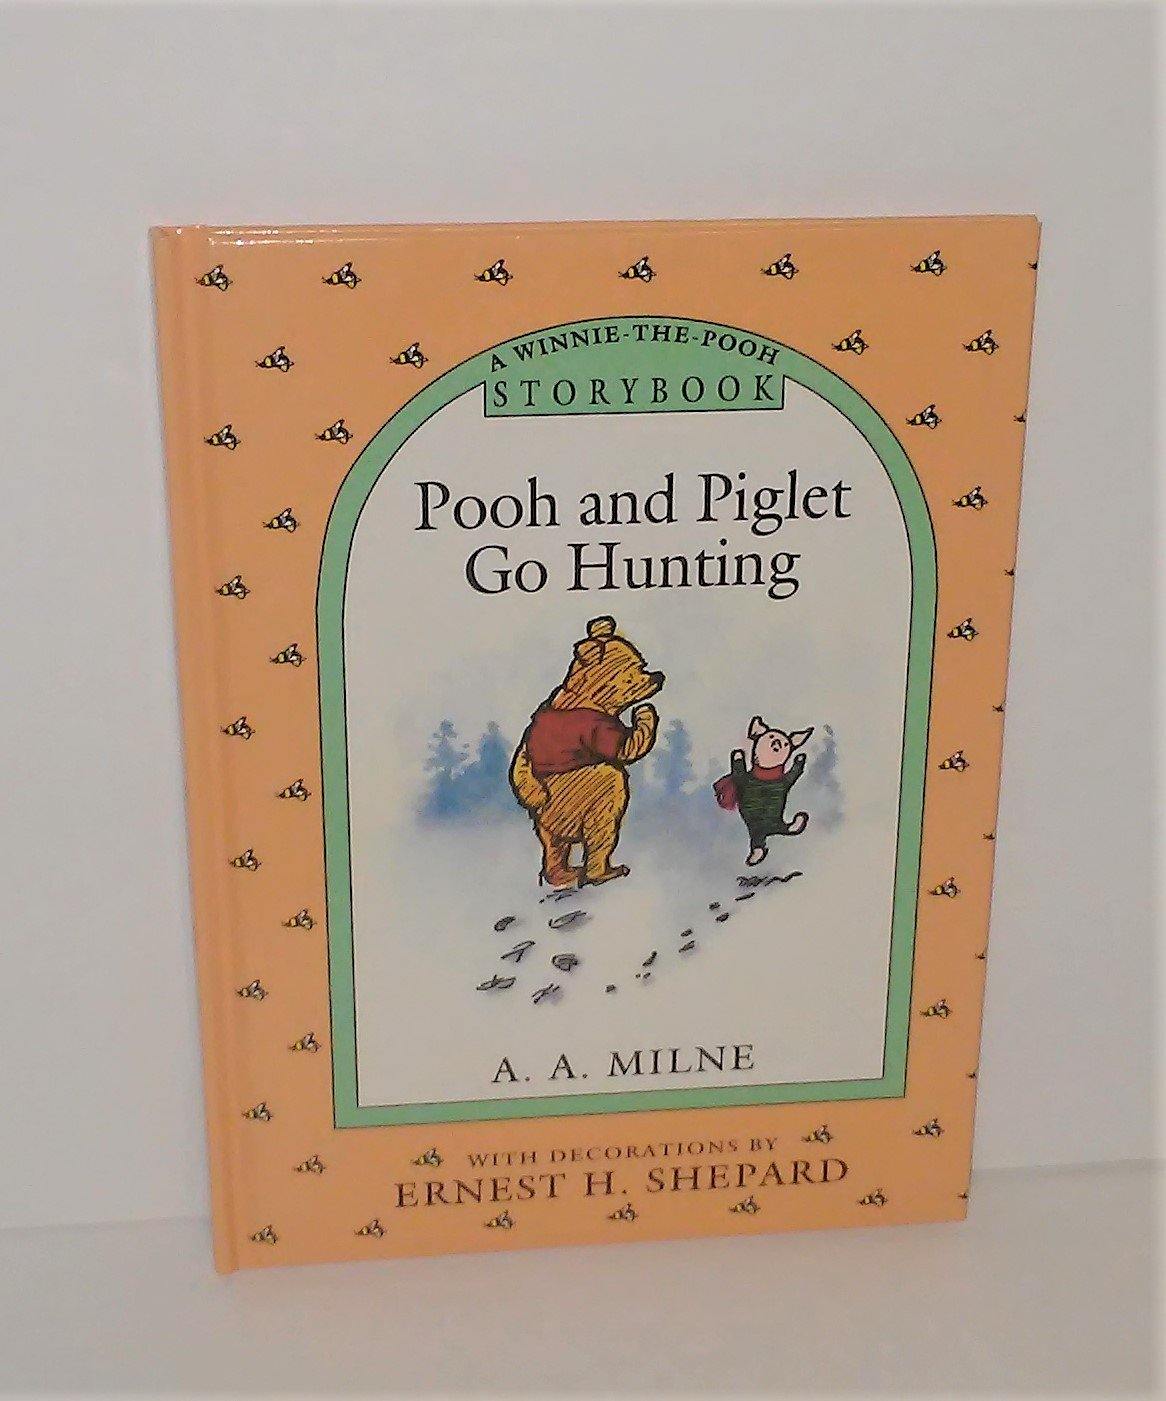 Pooh and Piglet Go Hunting - A Winnie the Pooh Storybook by A. A.